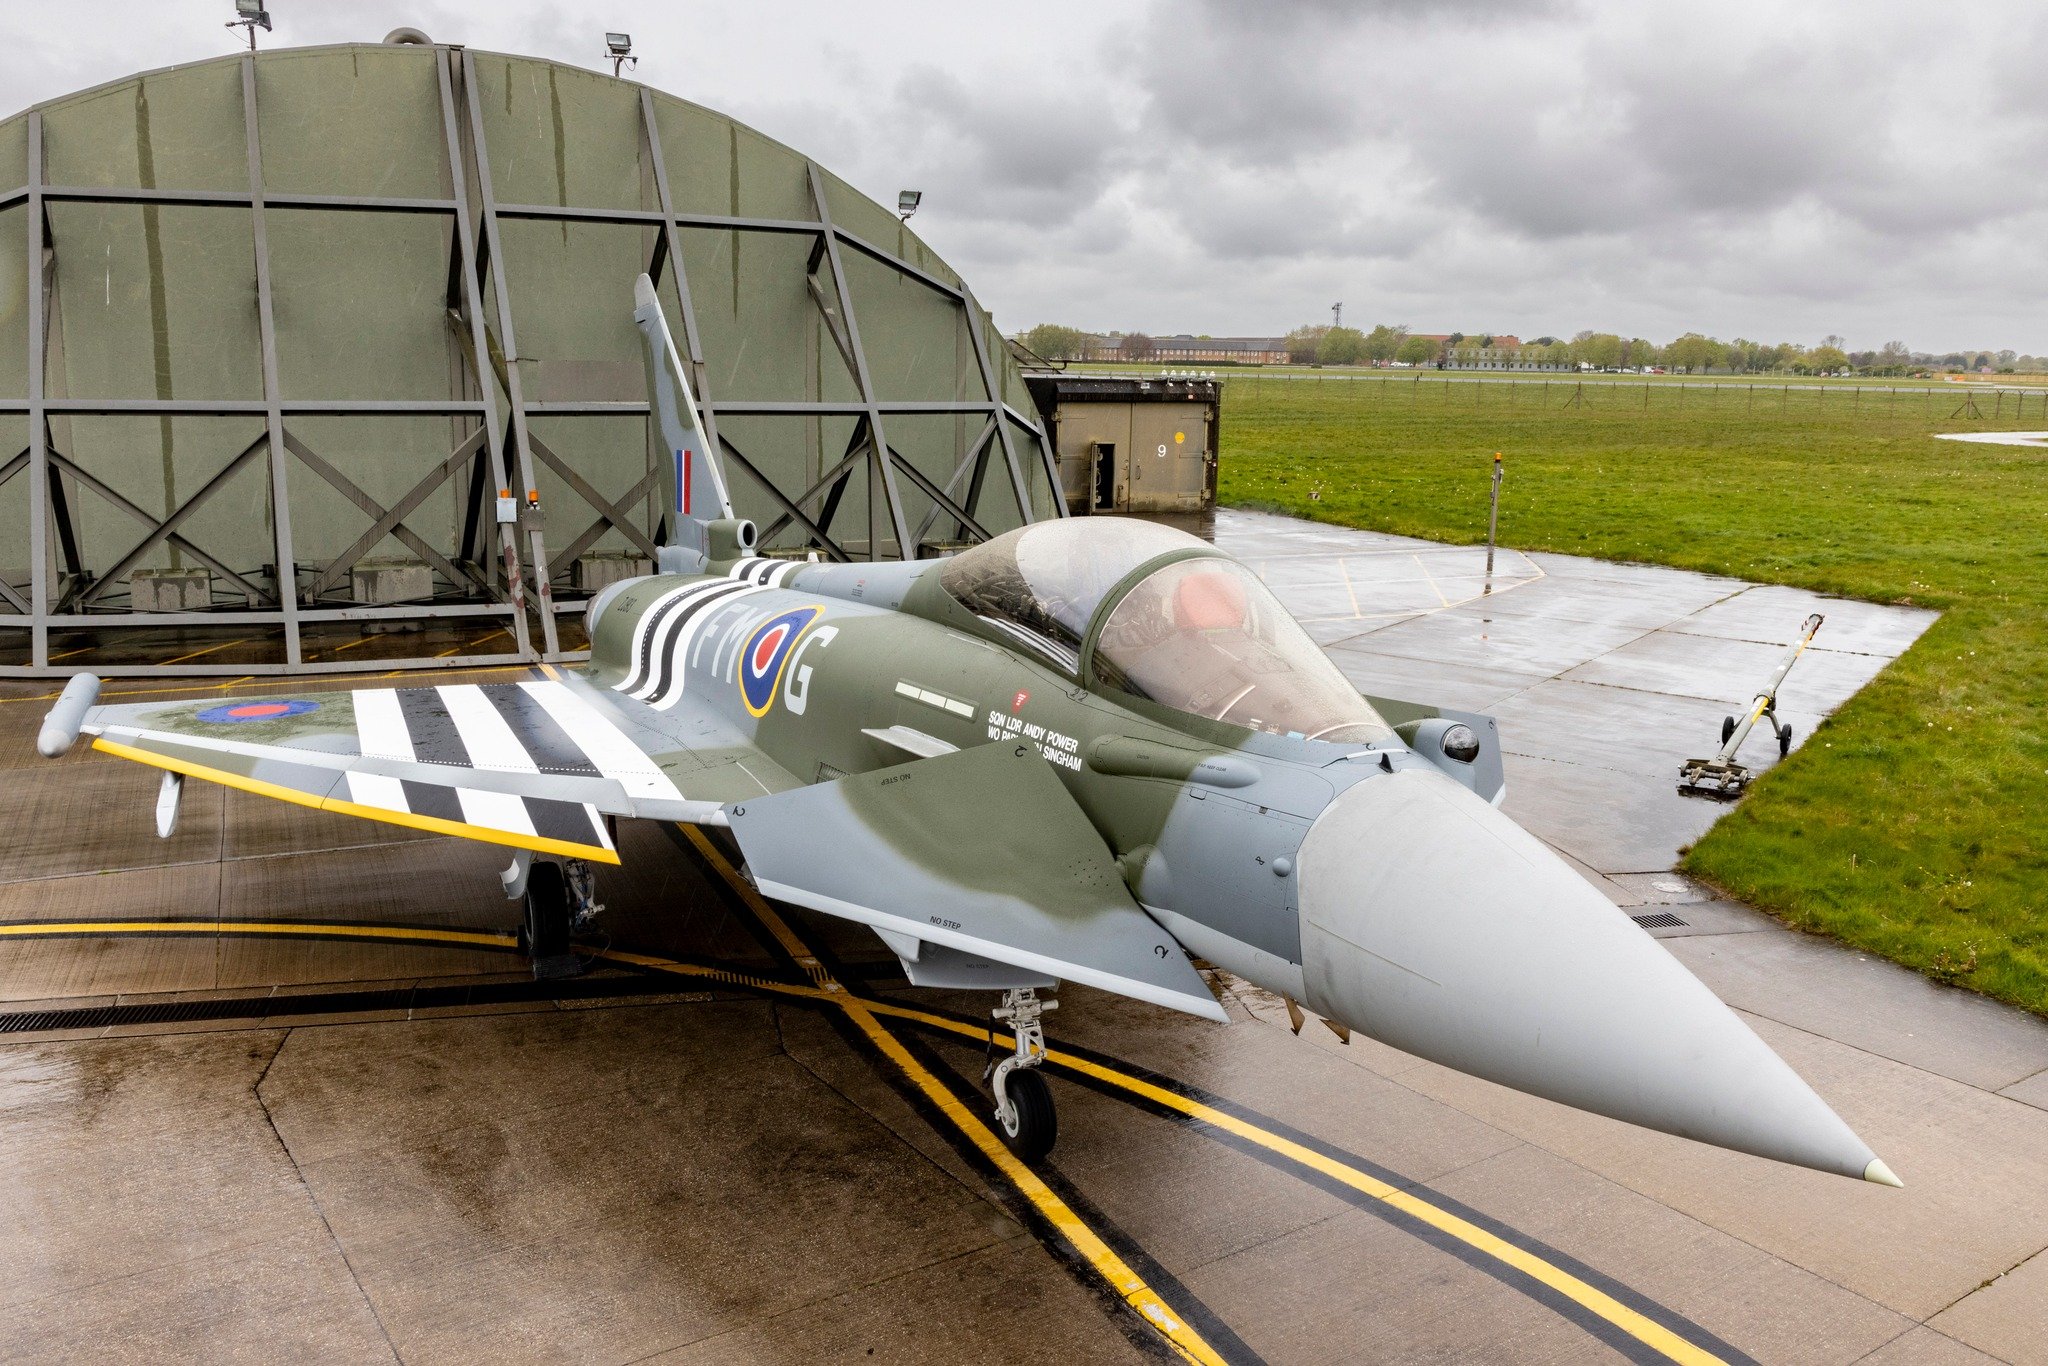 Yay or Nay? 👍👎

The RAF Typhoon Display Team's display jet for the 2024 season, 'Moggy', has been captured in stunning photographs released by the Royal Air Force.

Read more on our website by clicking the link below.

https://www.europeanairshows.